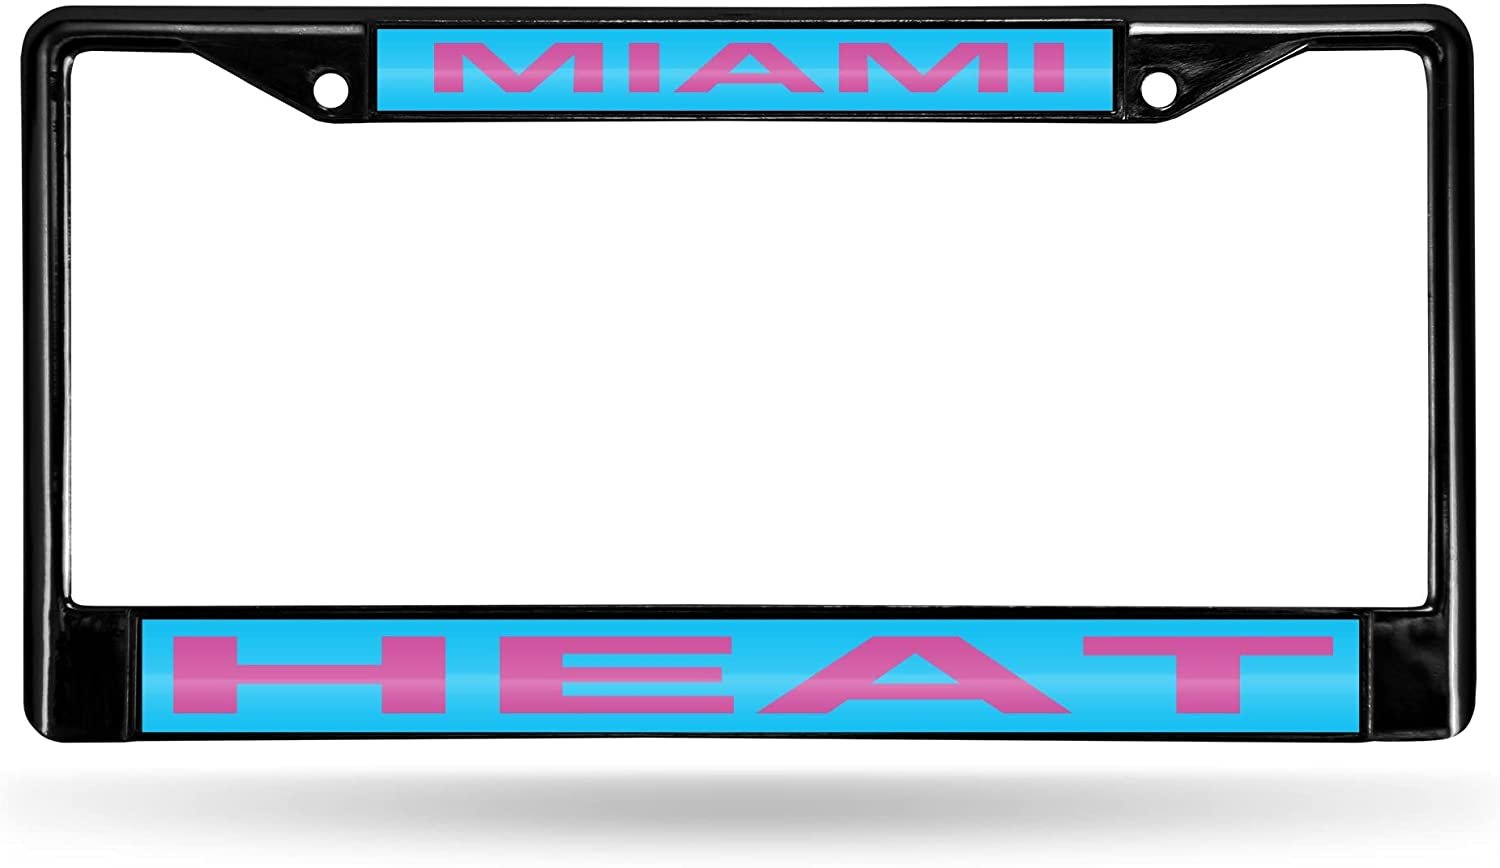 Miami Heat City Lights Design Black Metal License Plate Frame Tag Cover, Laser Acrylic Mirrored Inserts, 12x6 Inch